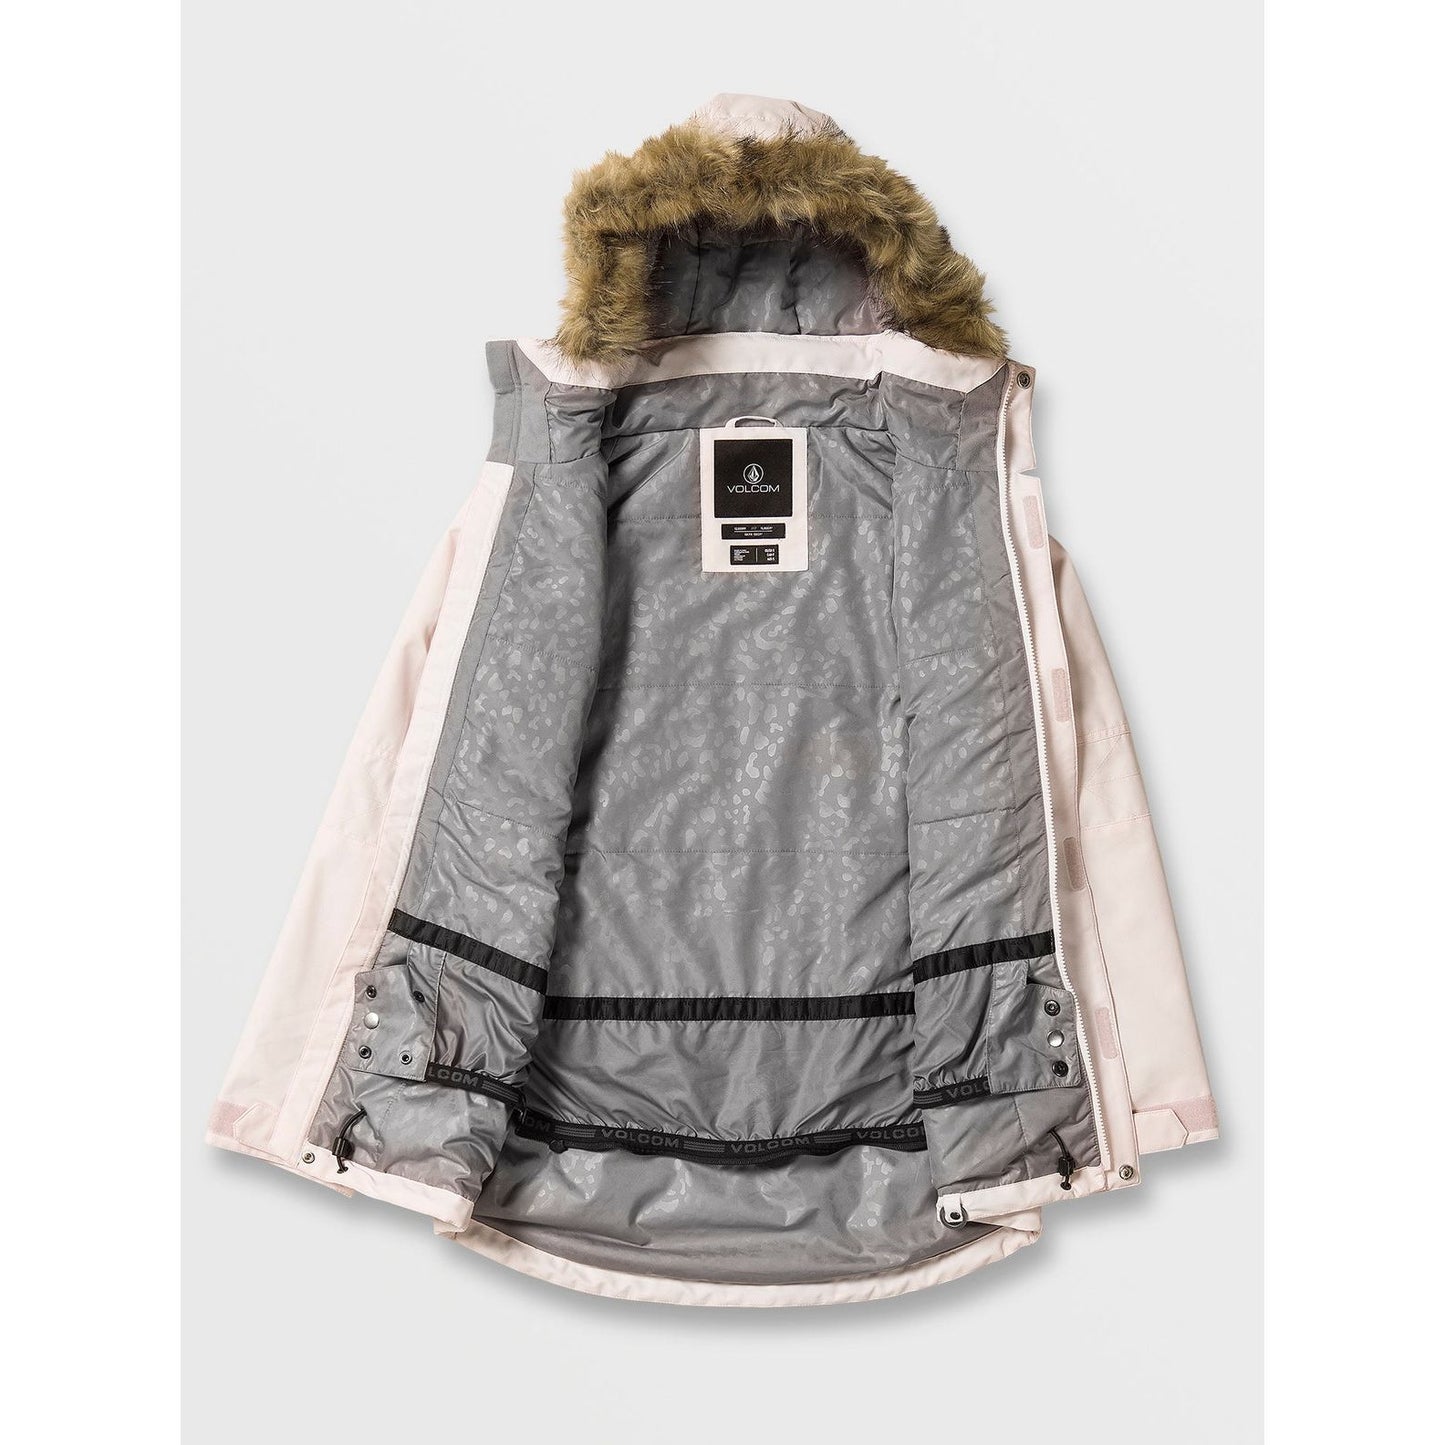 Volcom Women's Fawn Insulated Jacket Calcite Snow Jackets